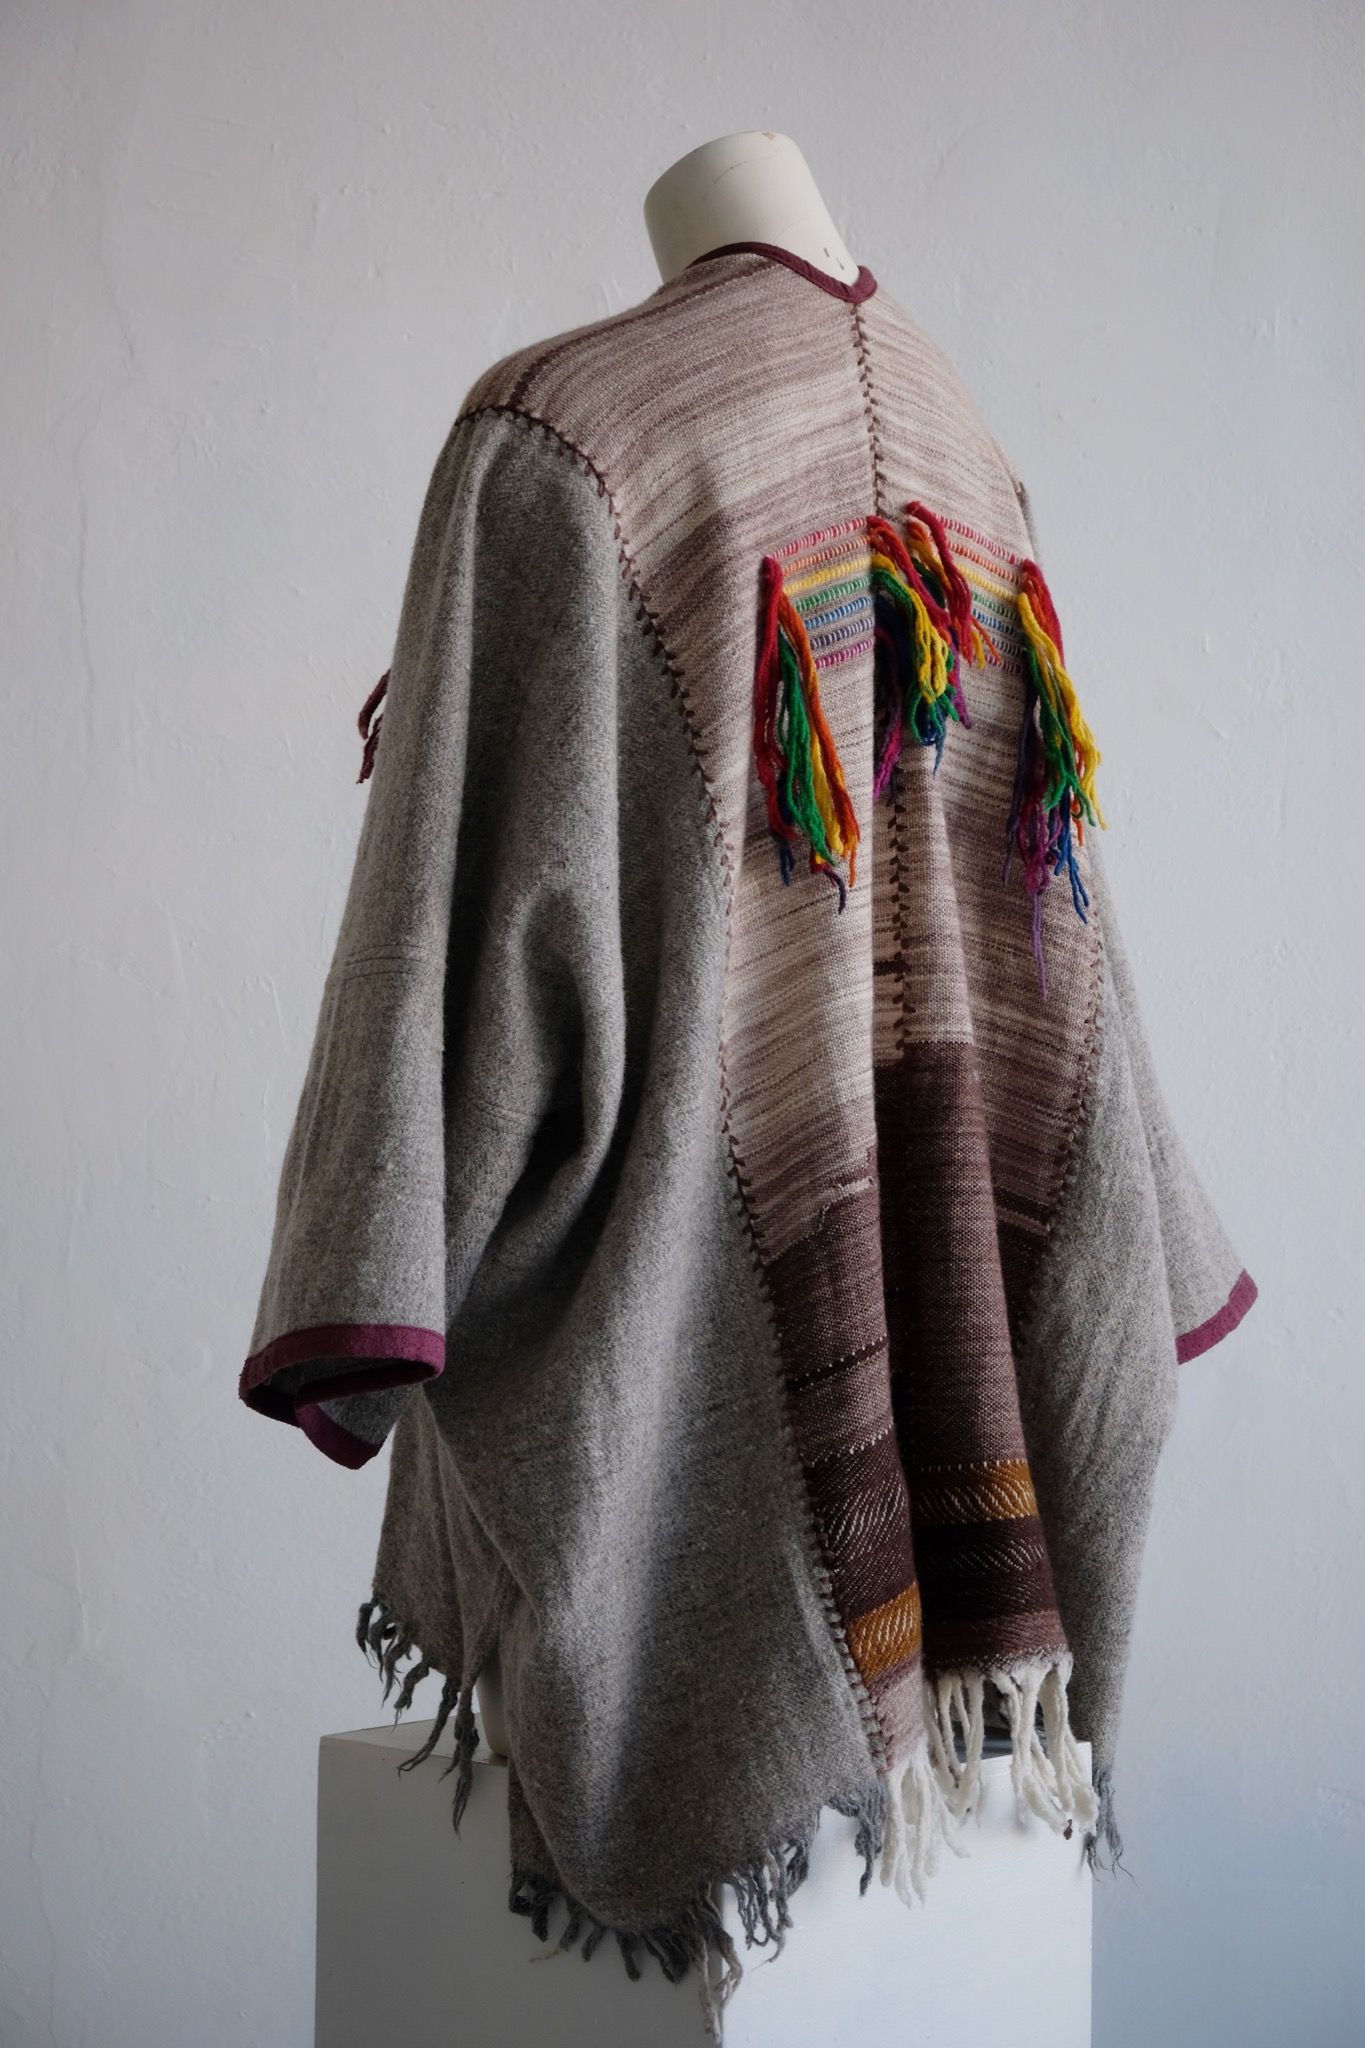 Handwoven, highly textured with fringe cloak that is grey, brown, green and rainbow on a white mannequin against a white wall